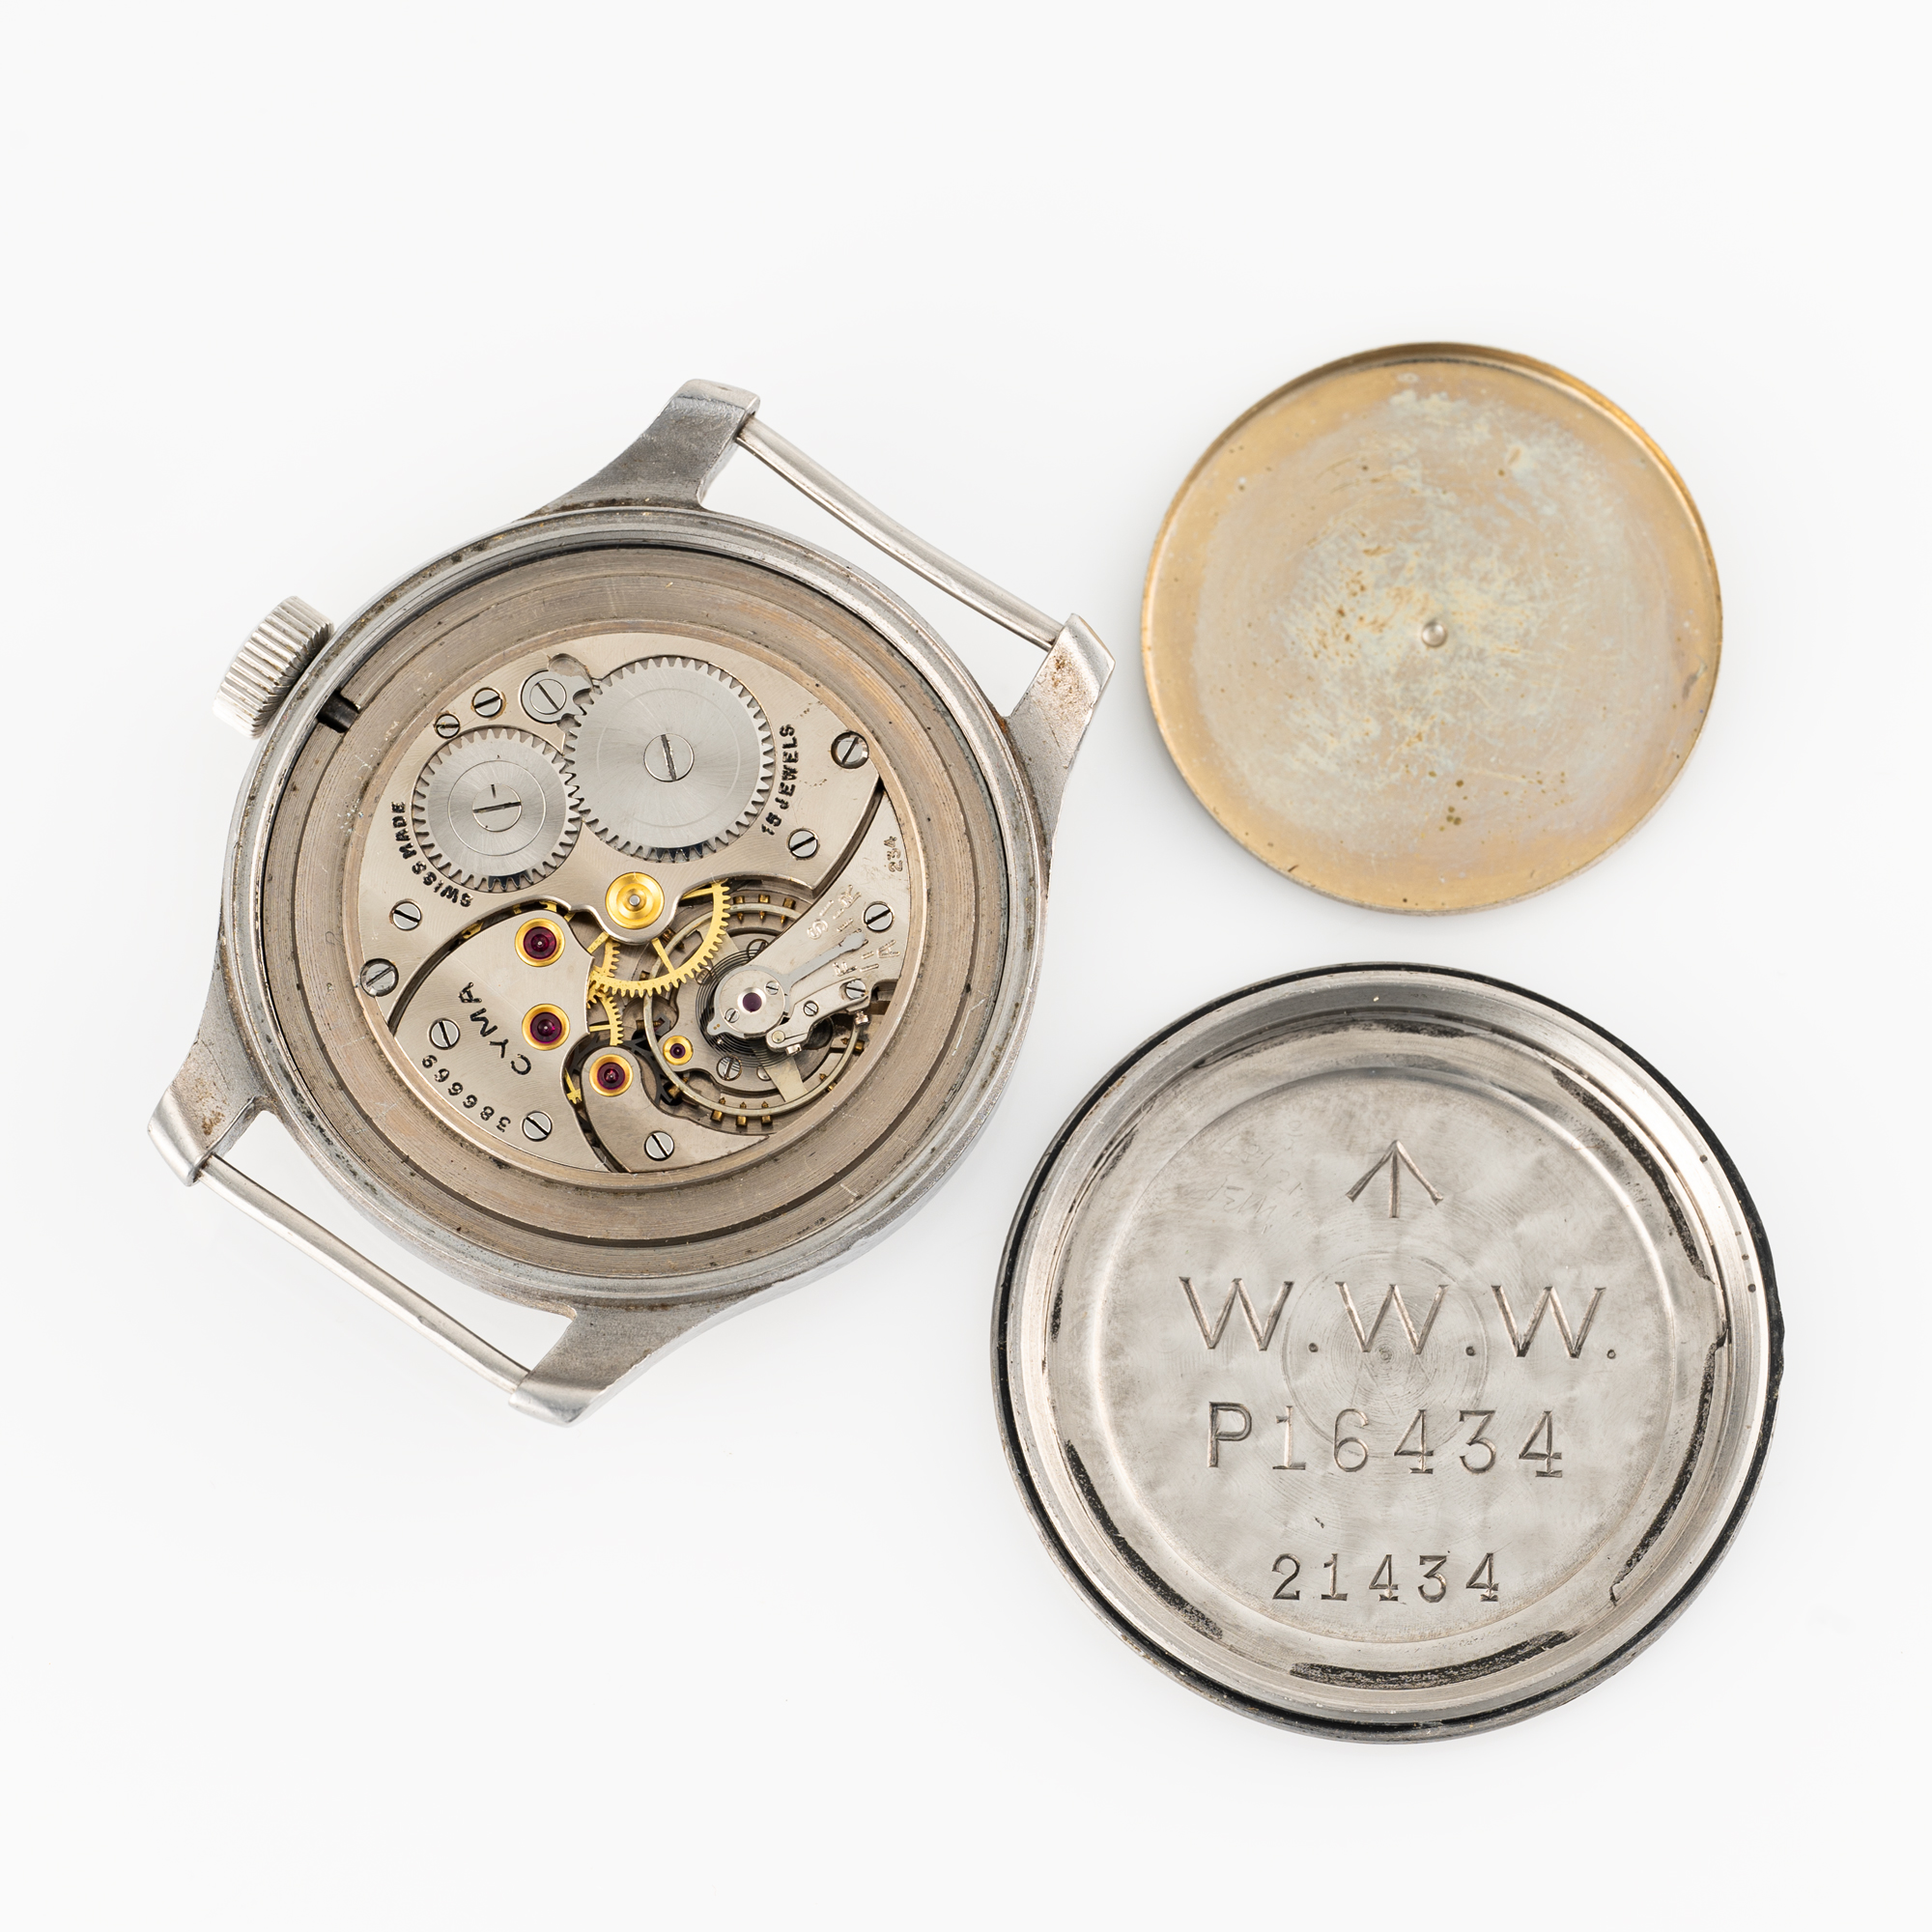 A GENTLEMAN'S STAINLESS STEEL BRITISH MILITARY CYMA W.W.W. WRIST WATCH CIRCA 1945, PART OF THE " - Image 7 of 8